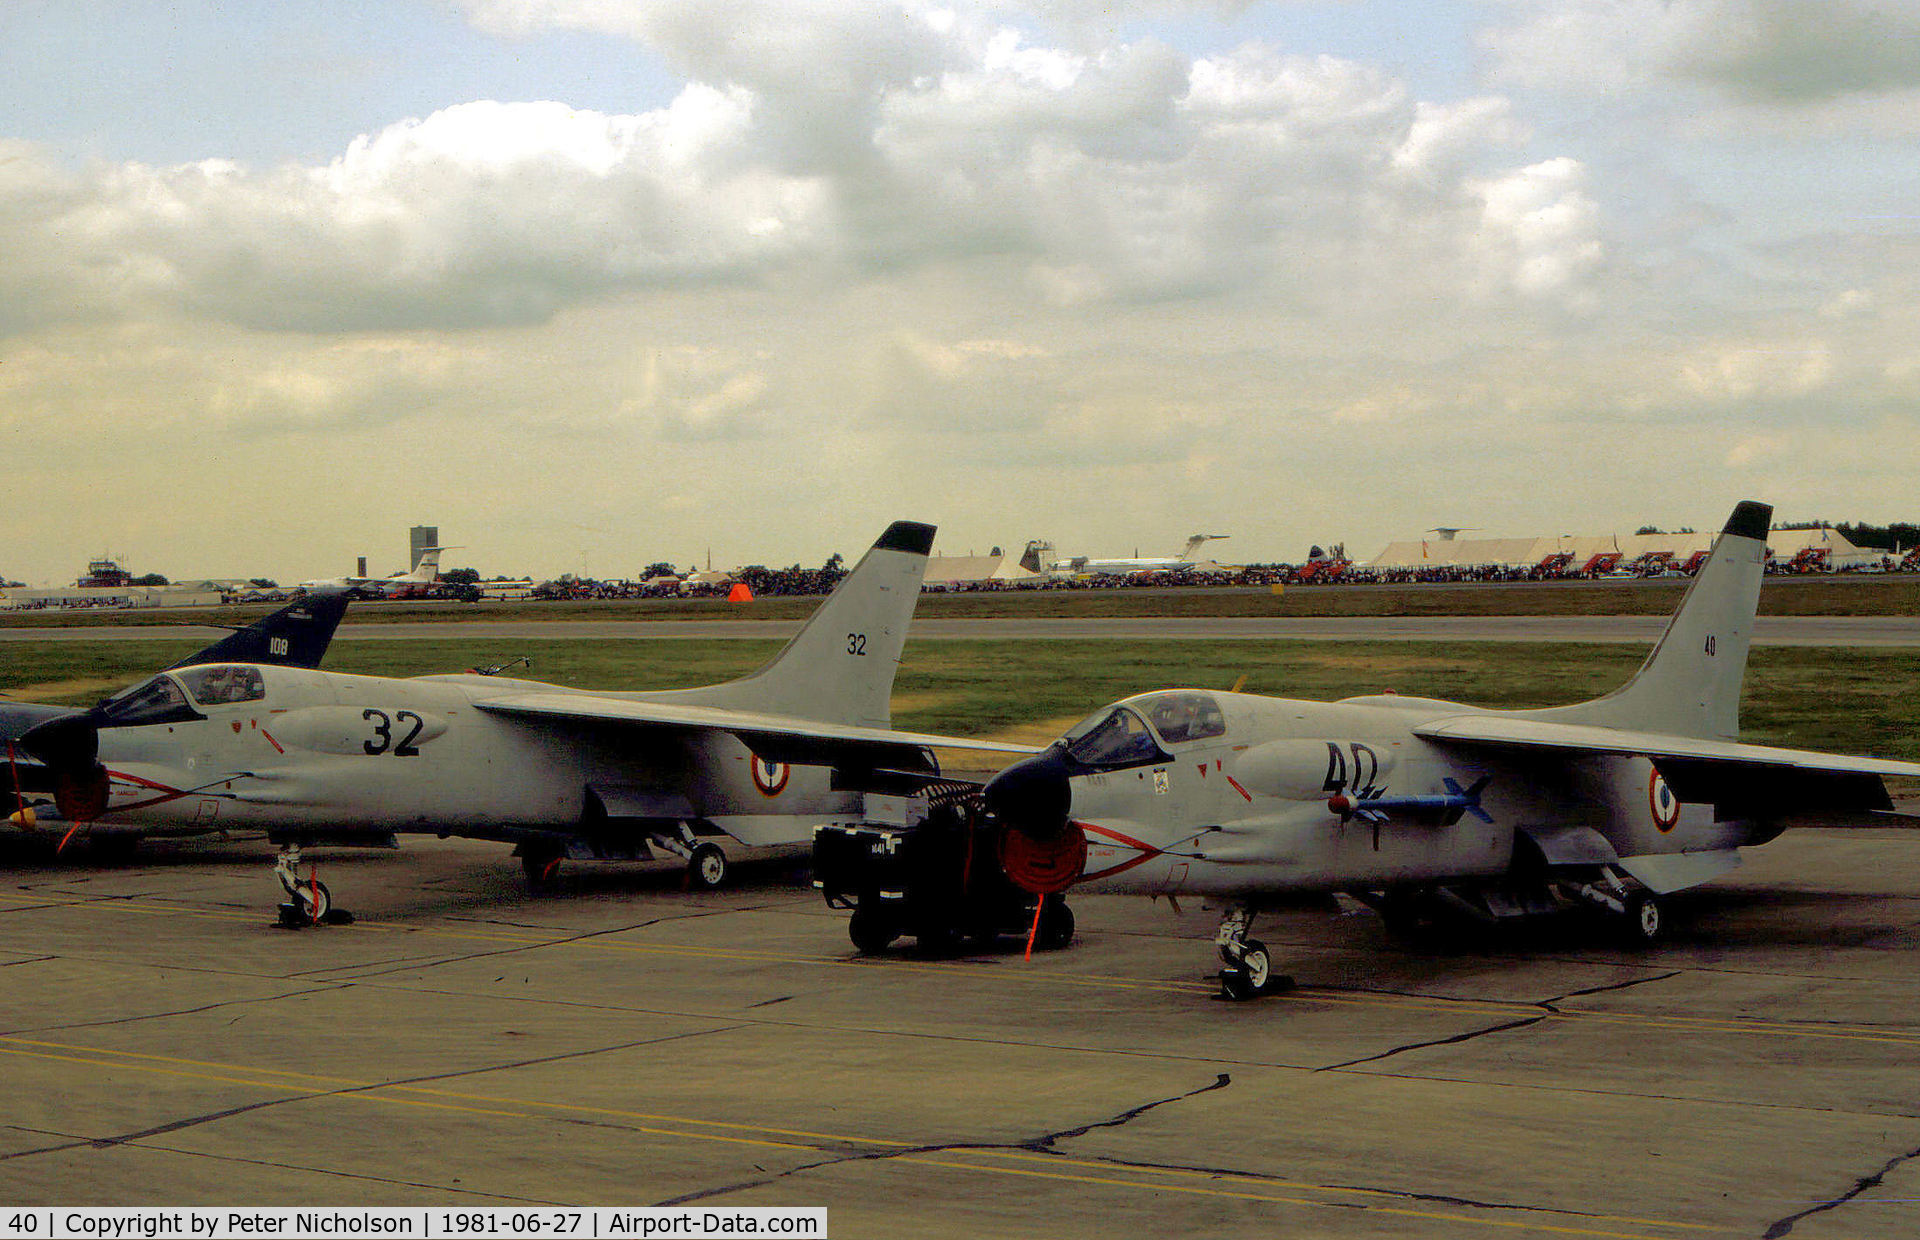 40, Vought F-8E(FN) Crusader C/N 1257, F-8E(FN) of Aeronavale's 12 Flotille on the flight-line alongside companion 32 of the same unit at the 1981 International Air Tattoo at RAF Greenham Common